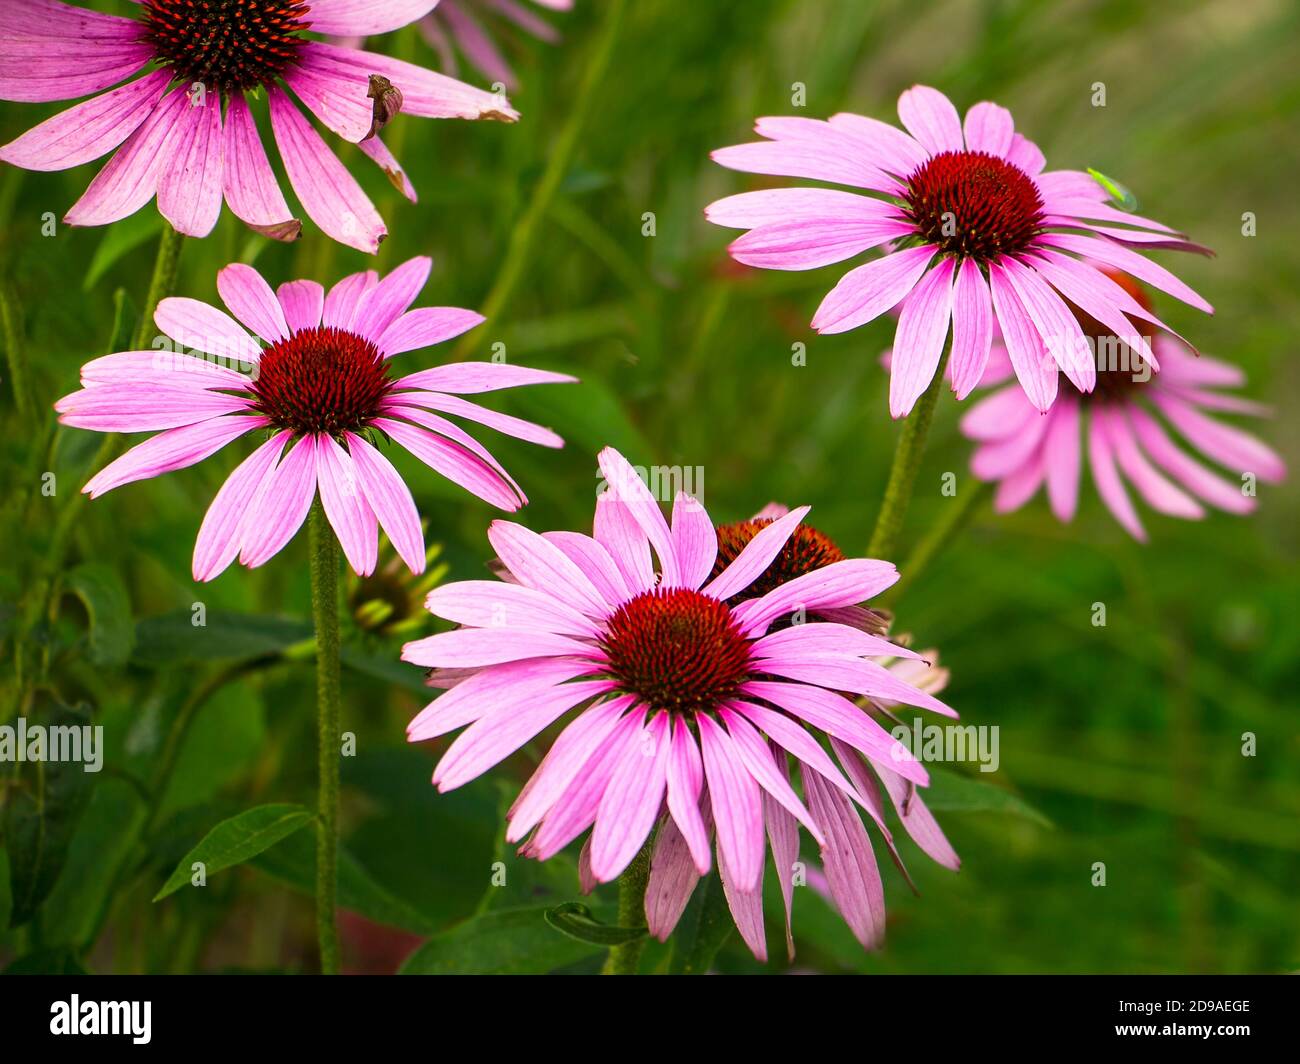 Group of purple pink echinacea cone flowers on blurred green background Stock Photo